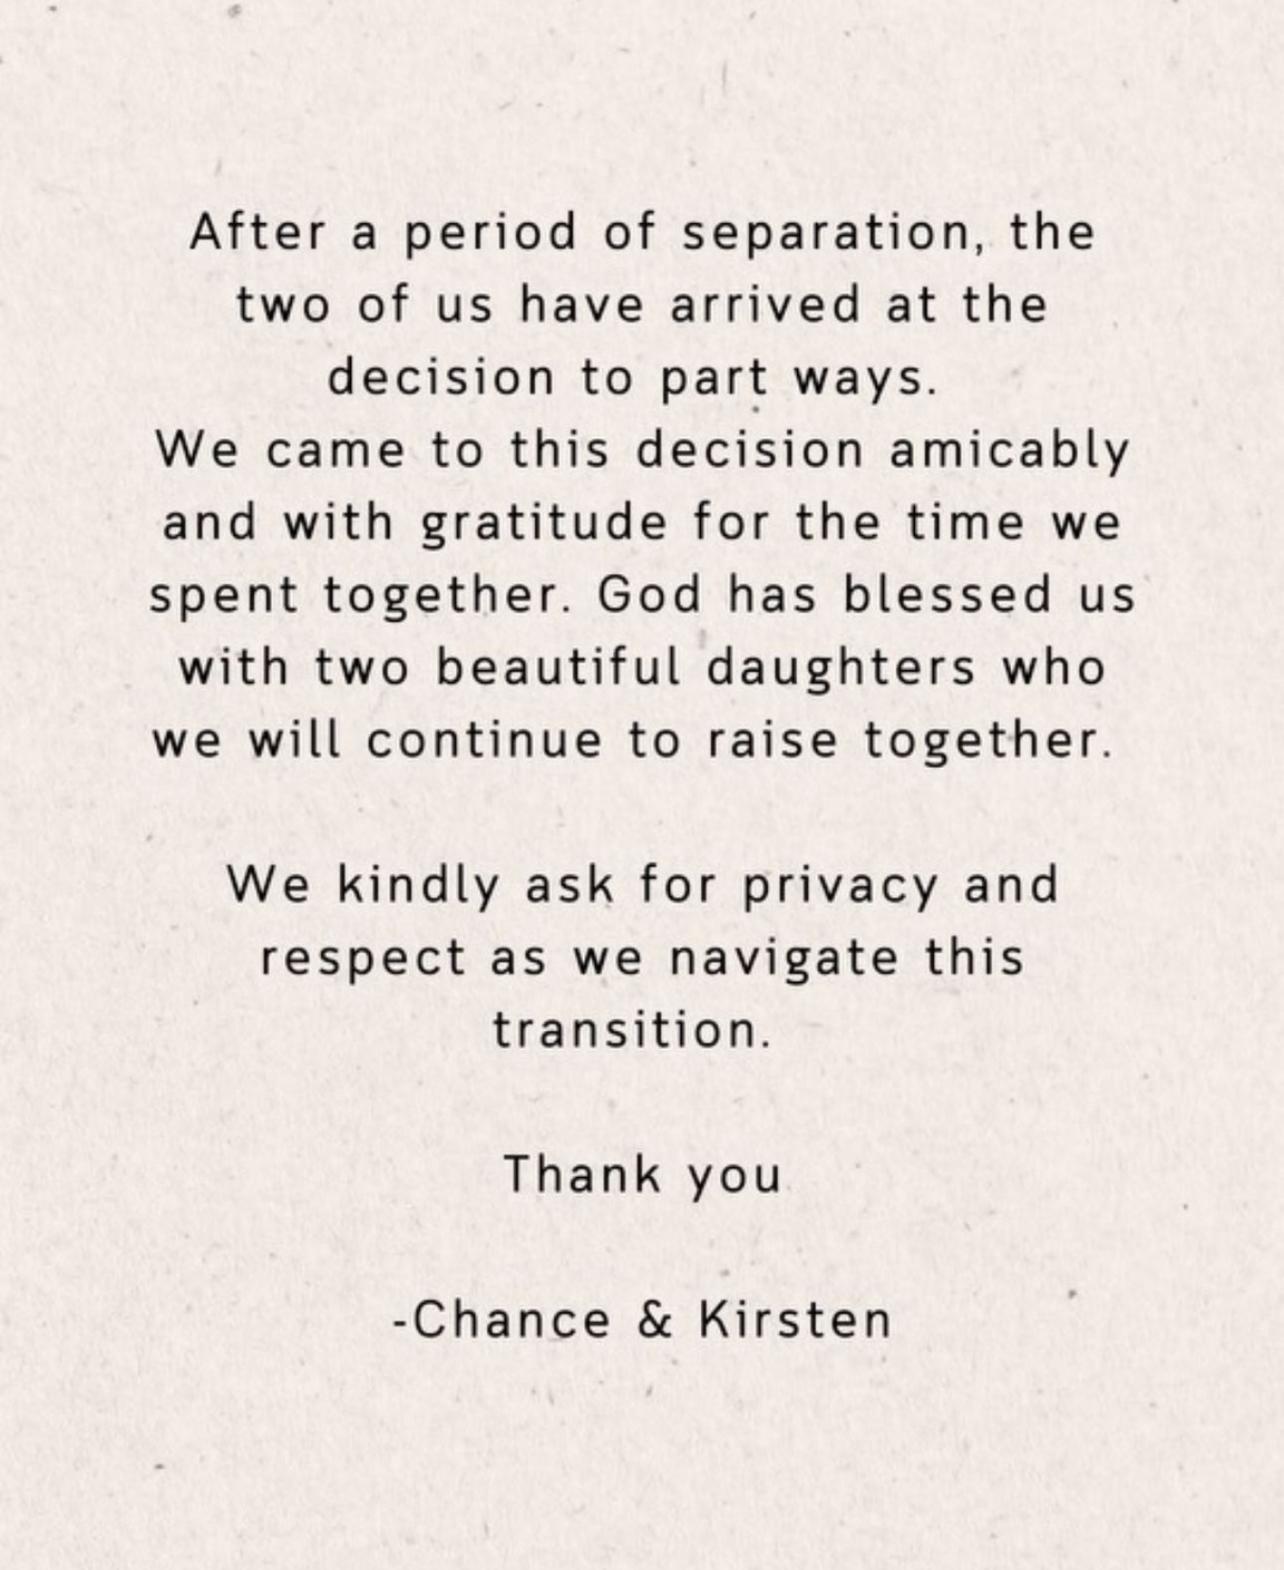 Chance The Rapper And His Wife Call It Quits 'After A Period Of Separation'